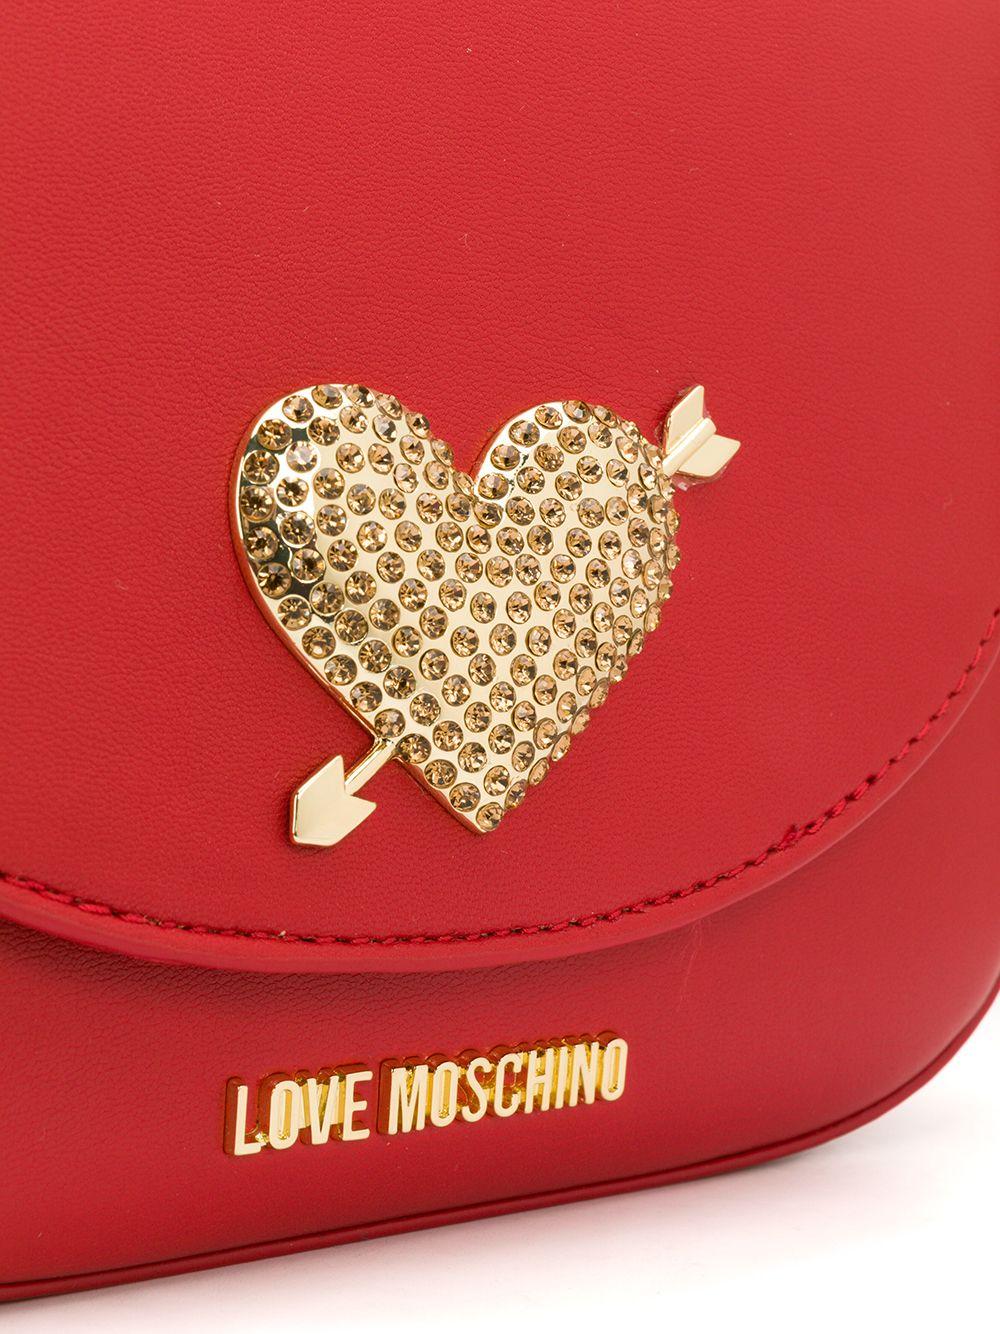 Love Moschino Embellished Heart Shoulder Bag in Red - Lyst